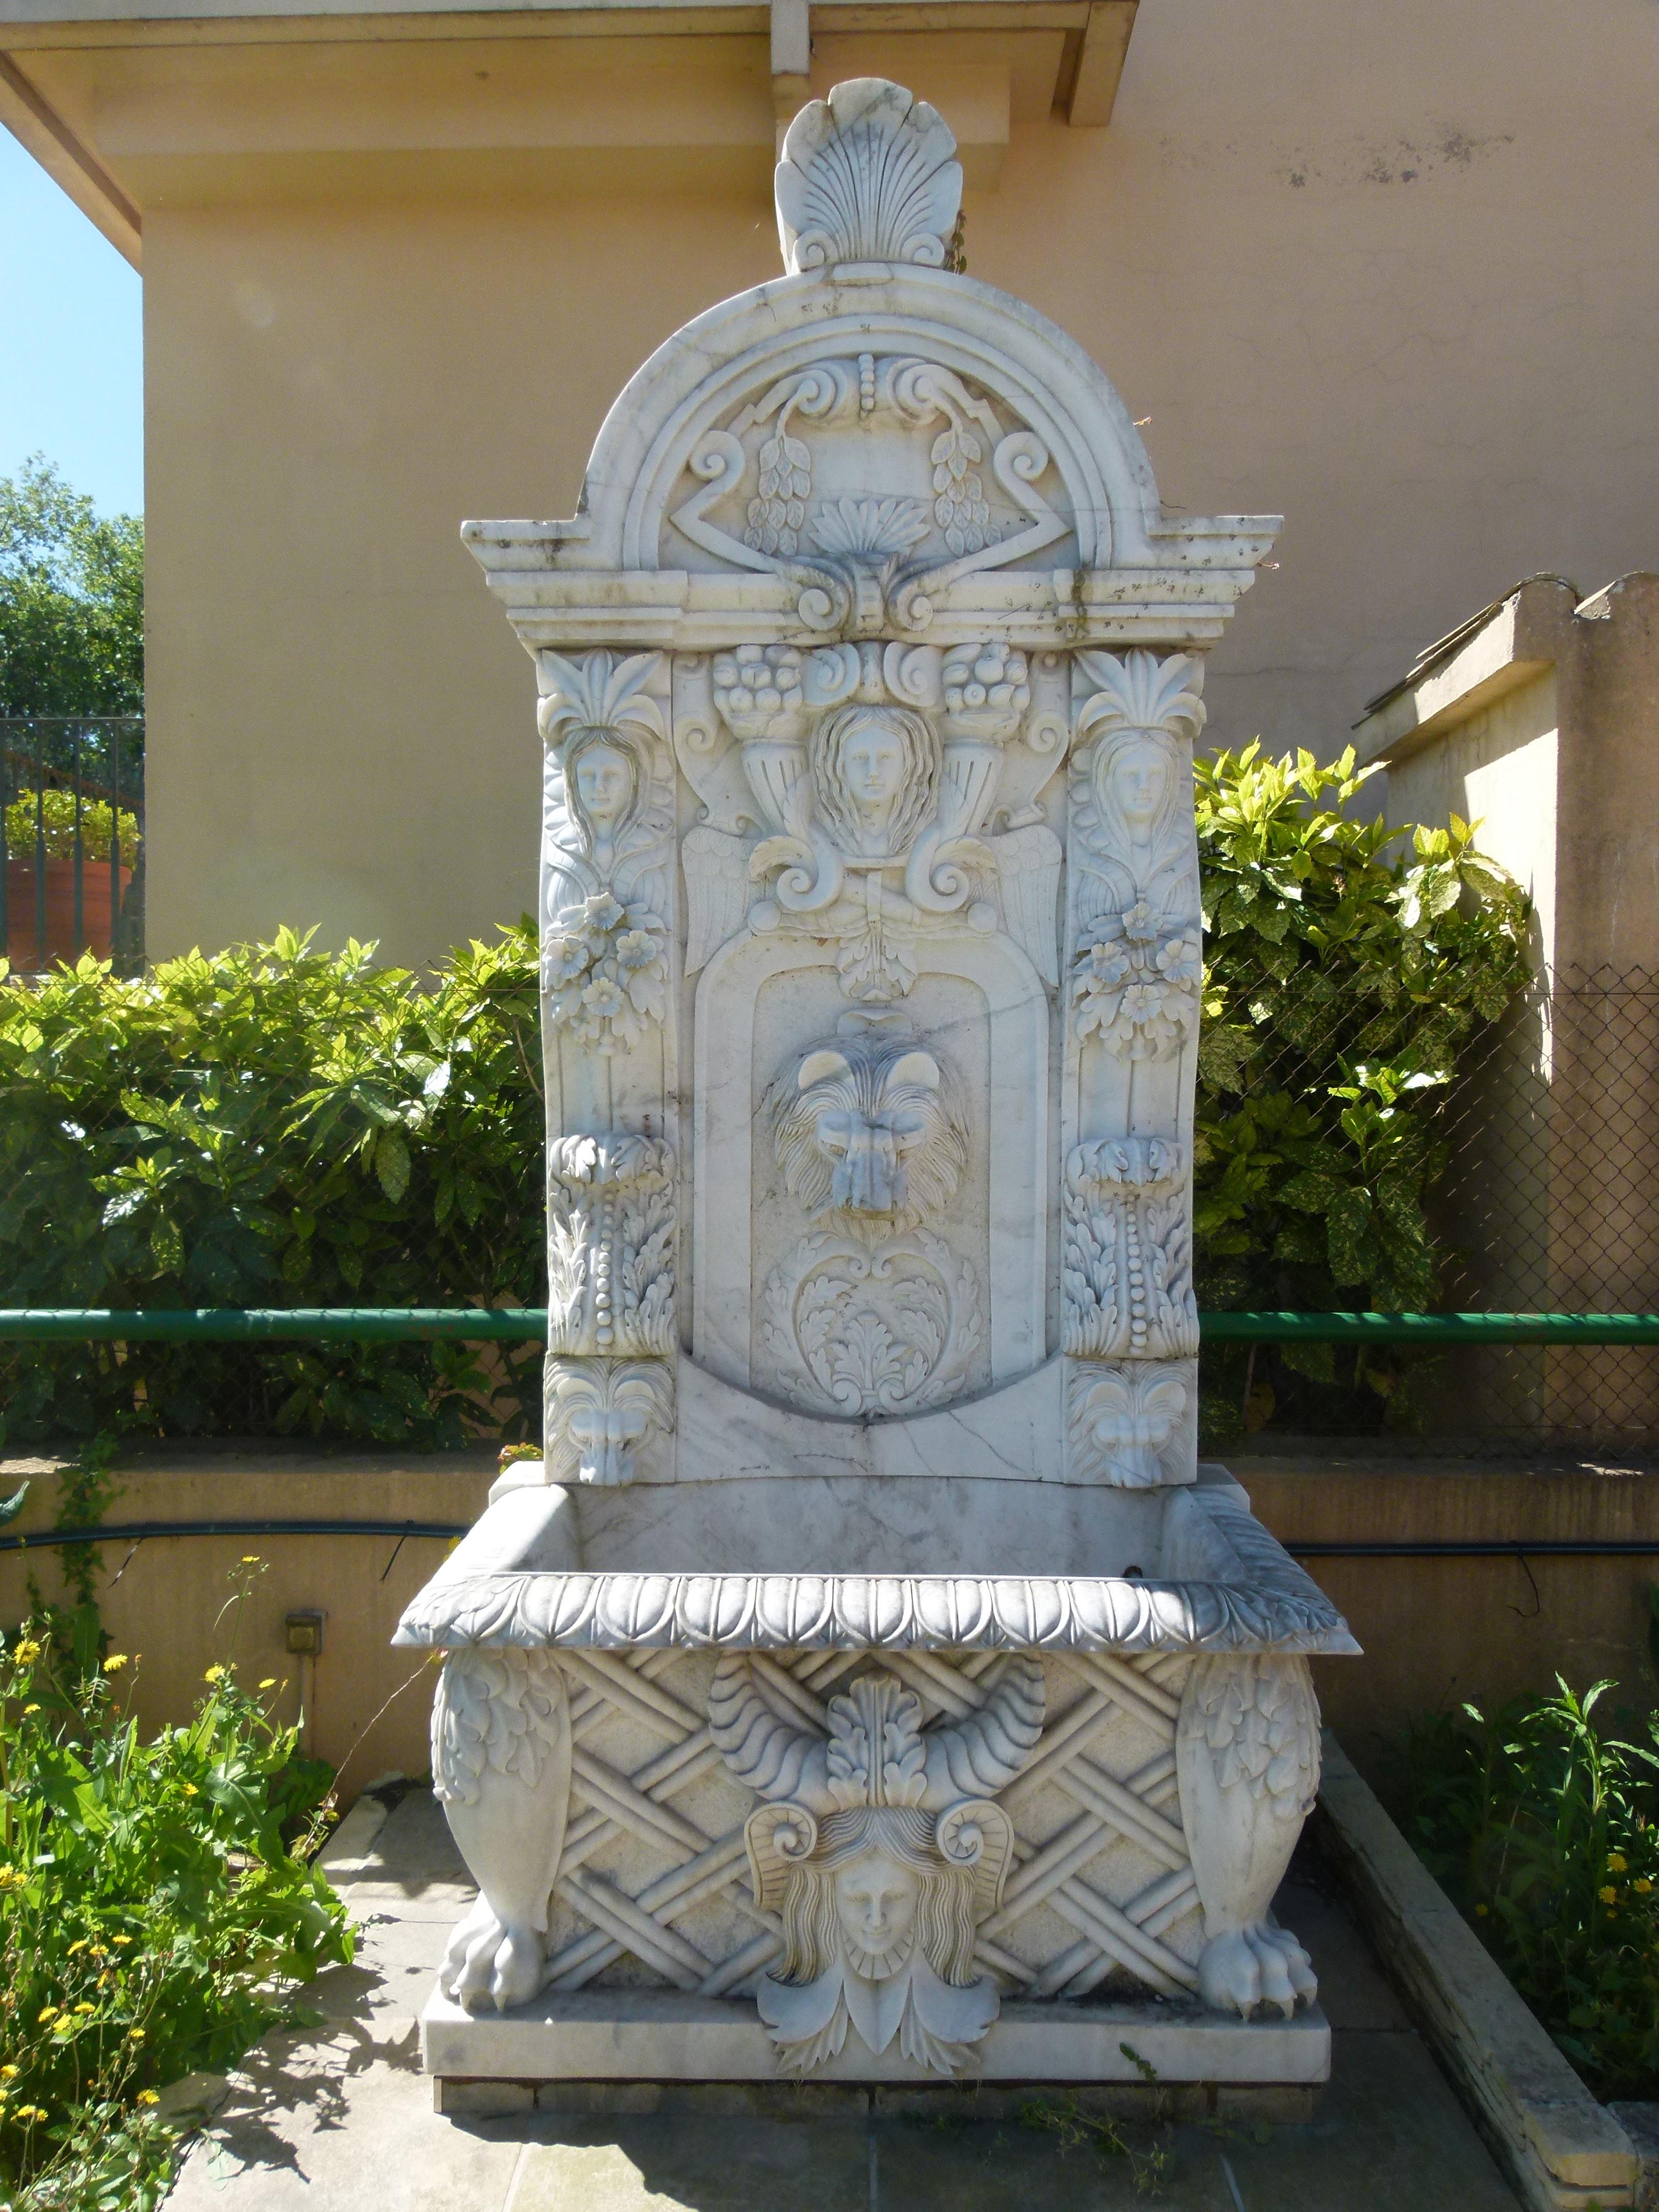 Hand carved white marble wall fountain in Classical style, made in the fifties in Spain.
Decorated with three women's heads figures on the upper part, a lion head figure in the center used as water spout, more lions heads on both laterals of the